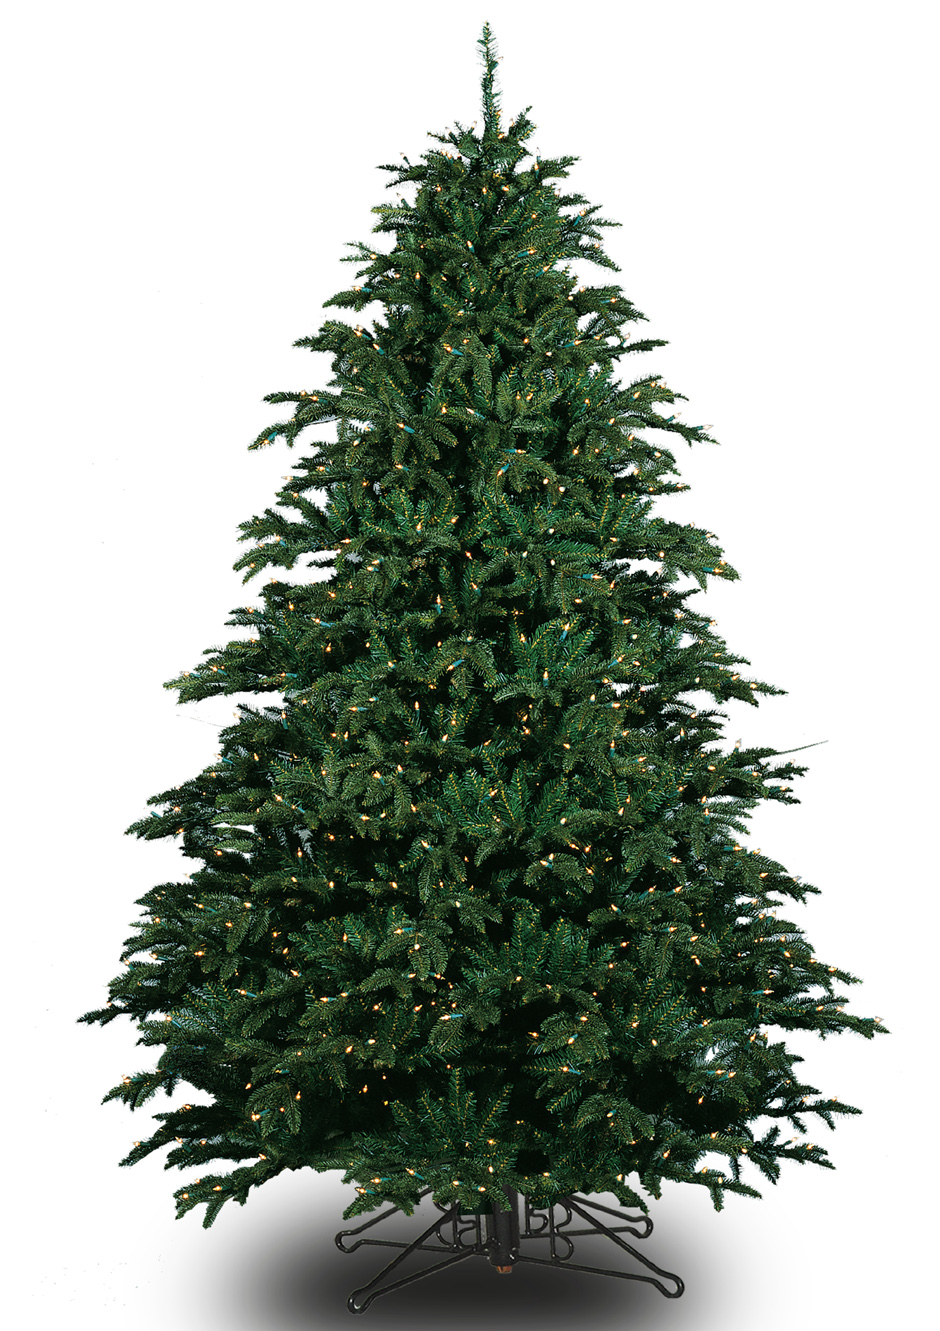 Alaskan Deluxe Christmas Tree - Clear Incandescent Lights - One-Plug Power Supply - 14ft Tall